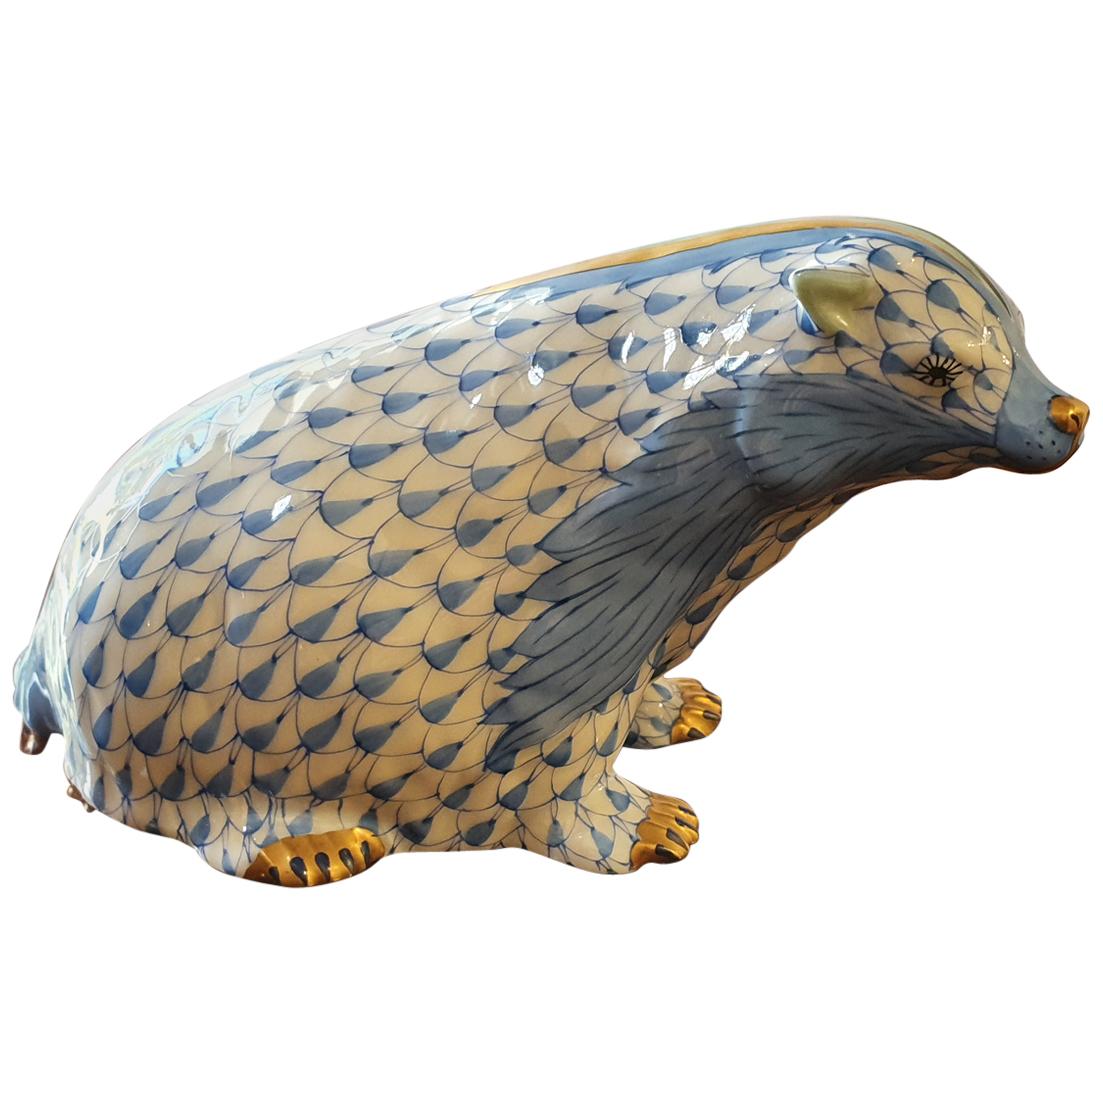 Modern Herend Hand Painted Porcelain "Badger" Figurine, Hungary